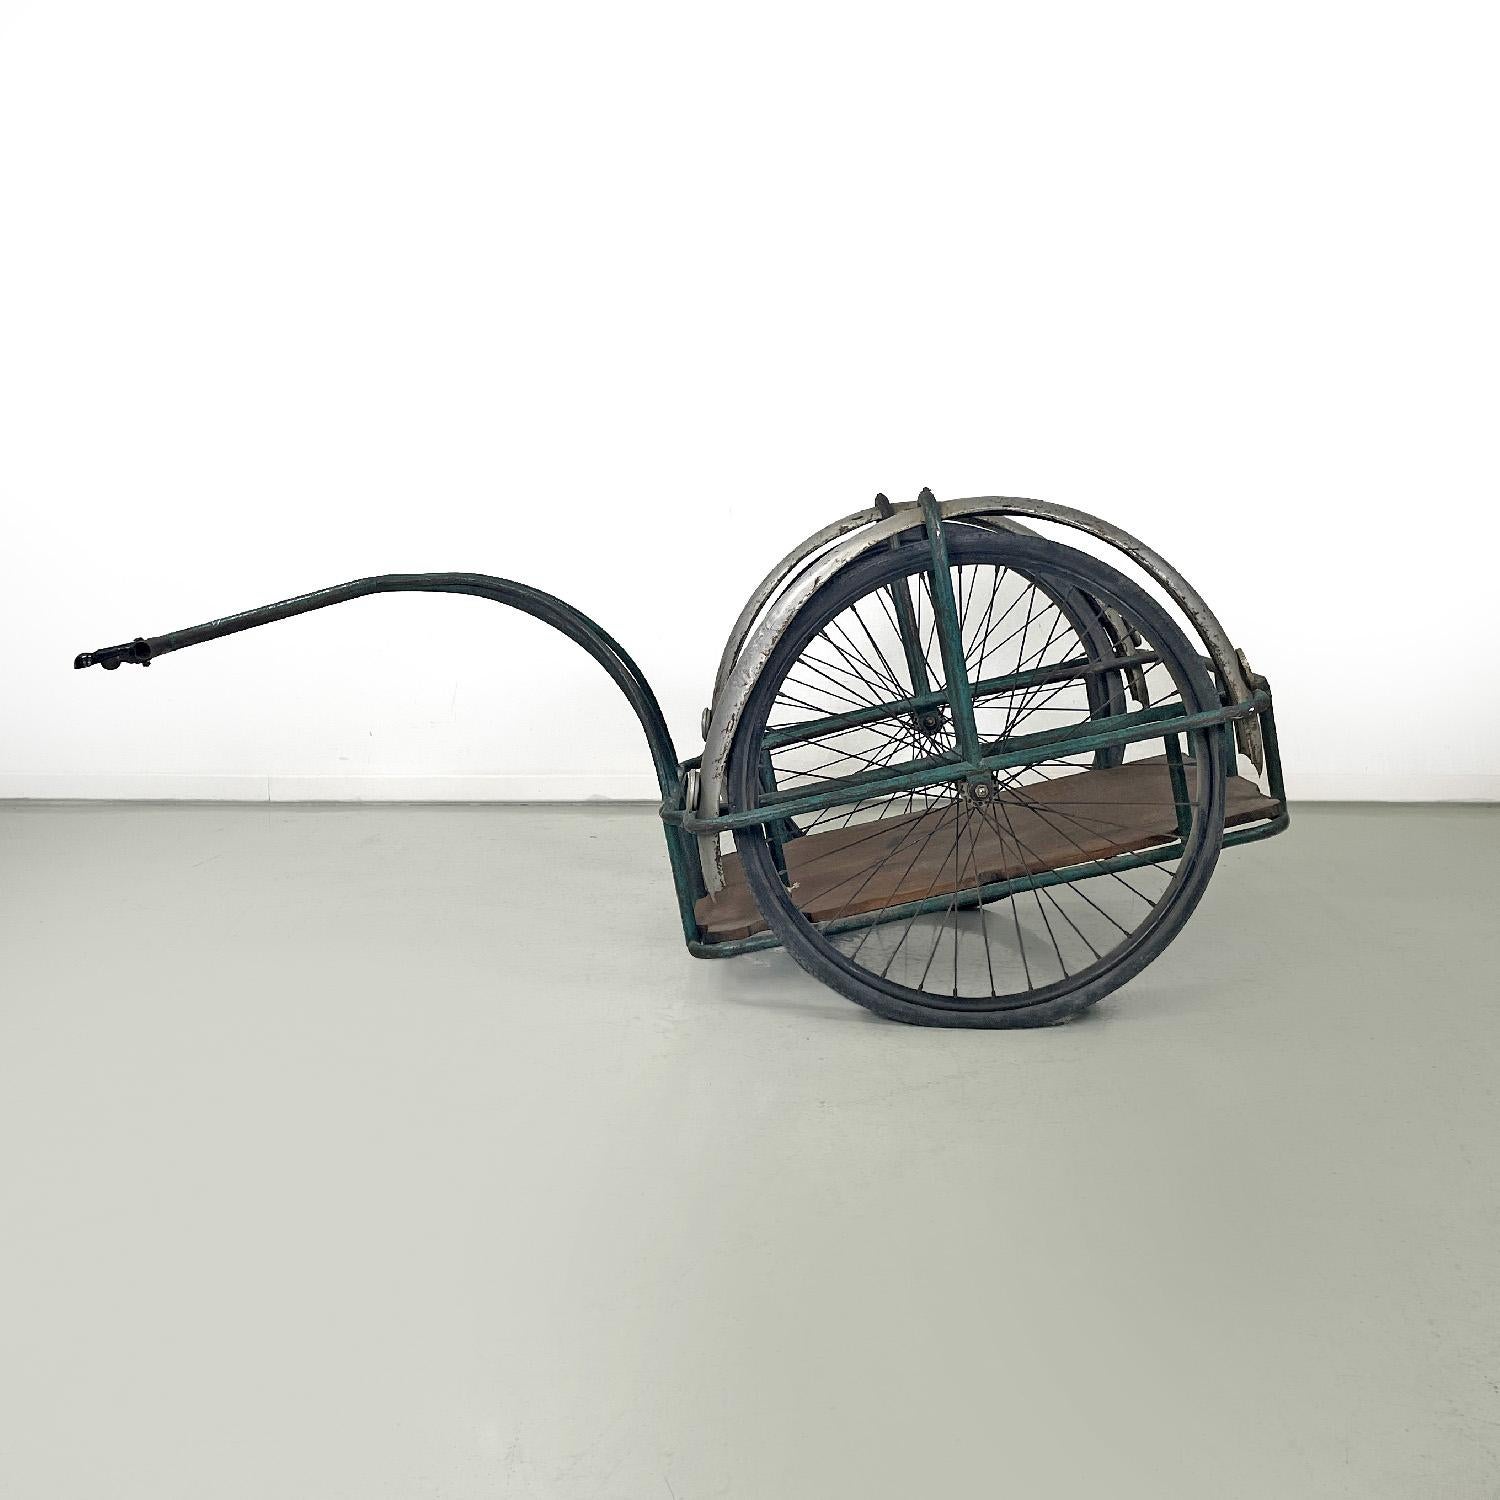 Italian mid-century modern bicycle trailer in metal and wood, 1960s
Bicycle trolley, trailer or cargo bike with green painted metal structure. The structure is made up of an arm that attaches to the bicycle frame at one end, while the other end